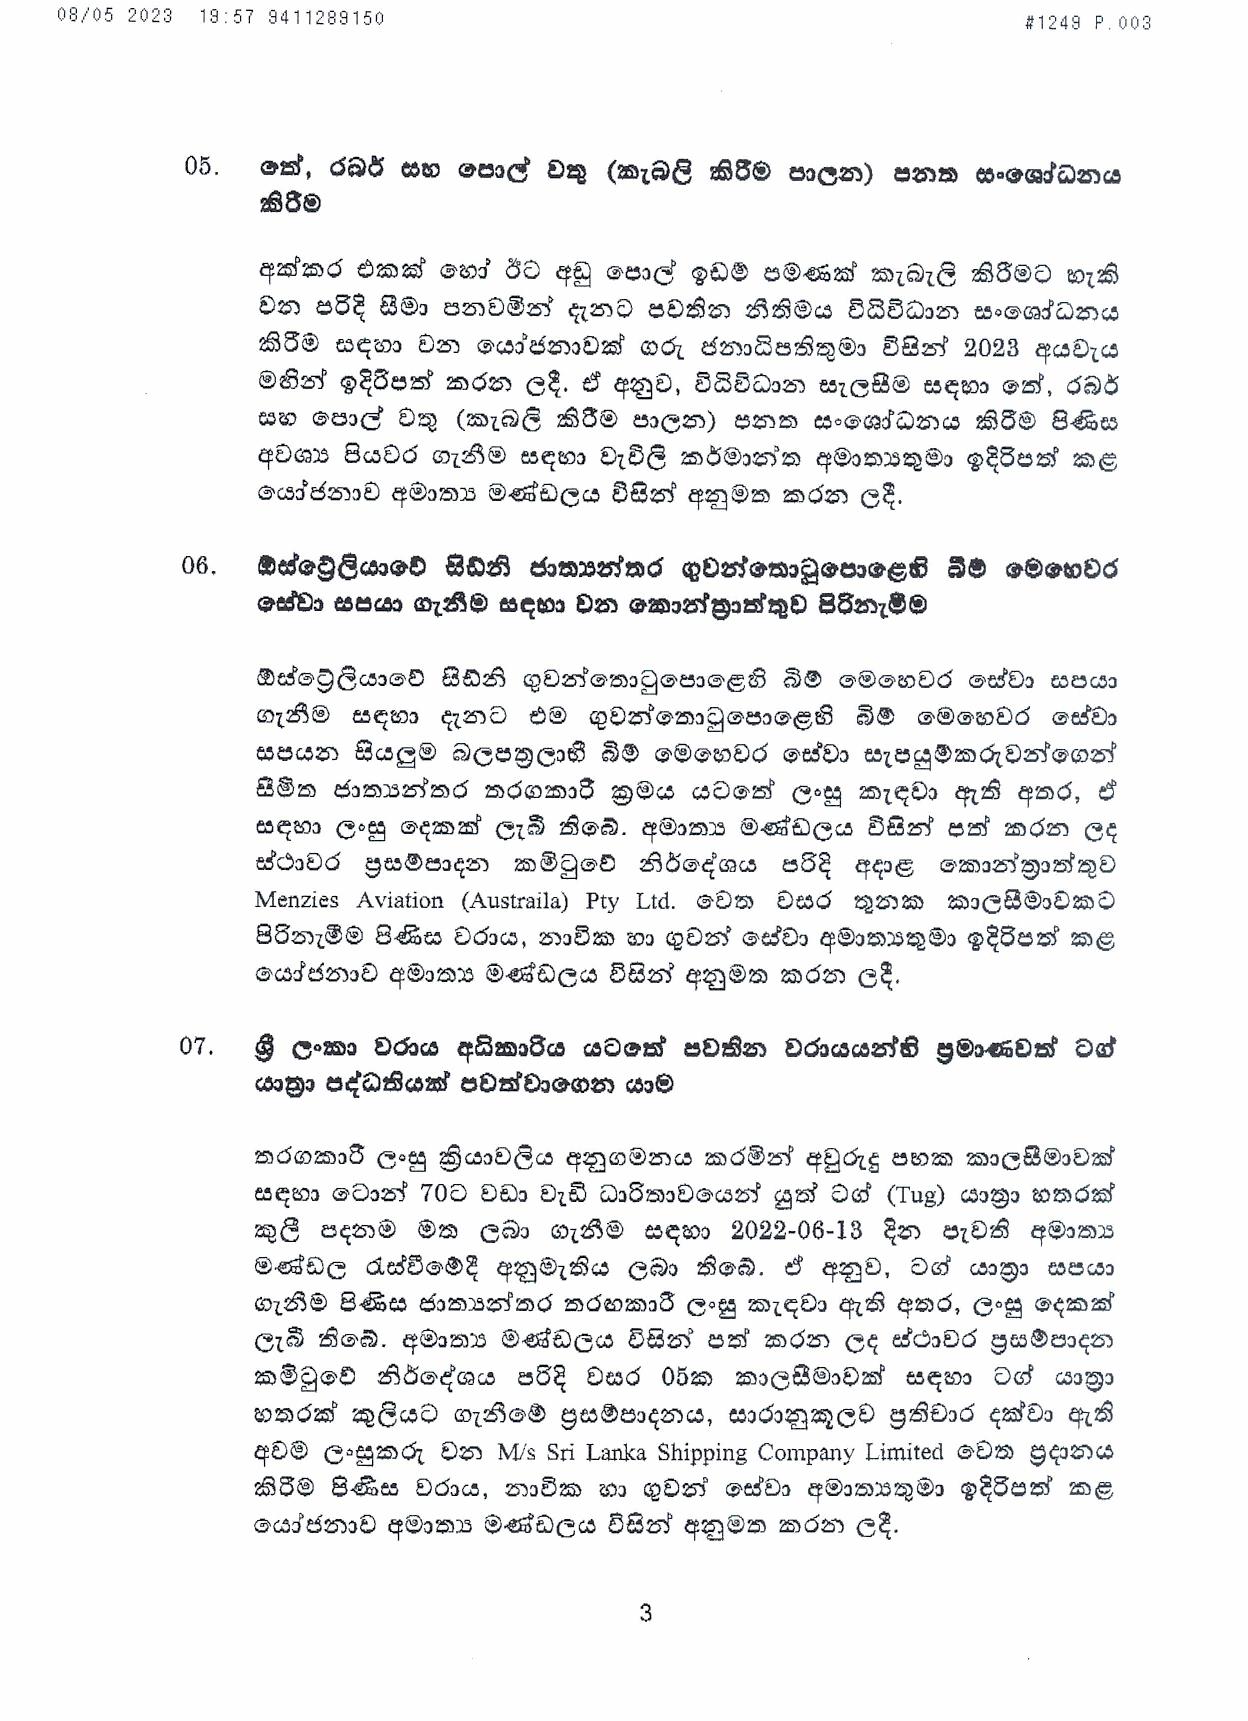 Cabinet Decisions on 08.05.2023 page 003